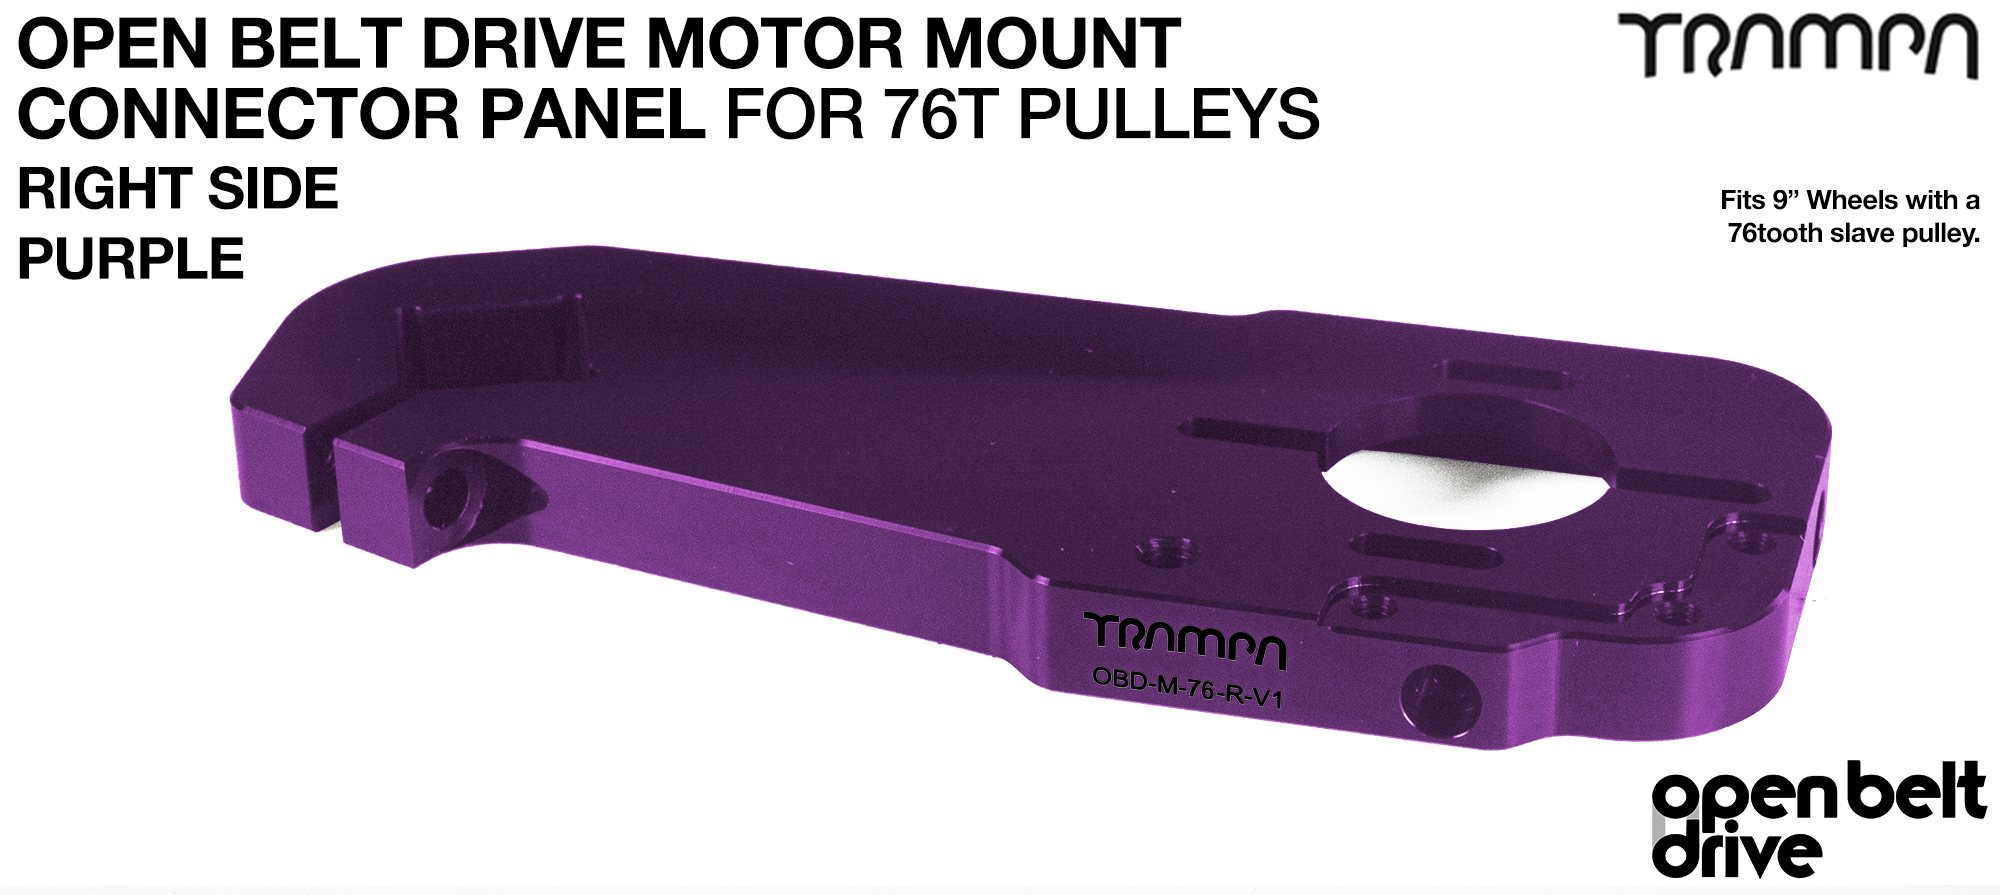 OBD Motor Mount Connector Panel for 76 tooth Pulleys - GOOFY - PURPLE